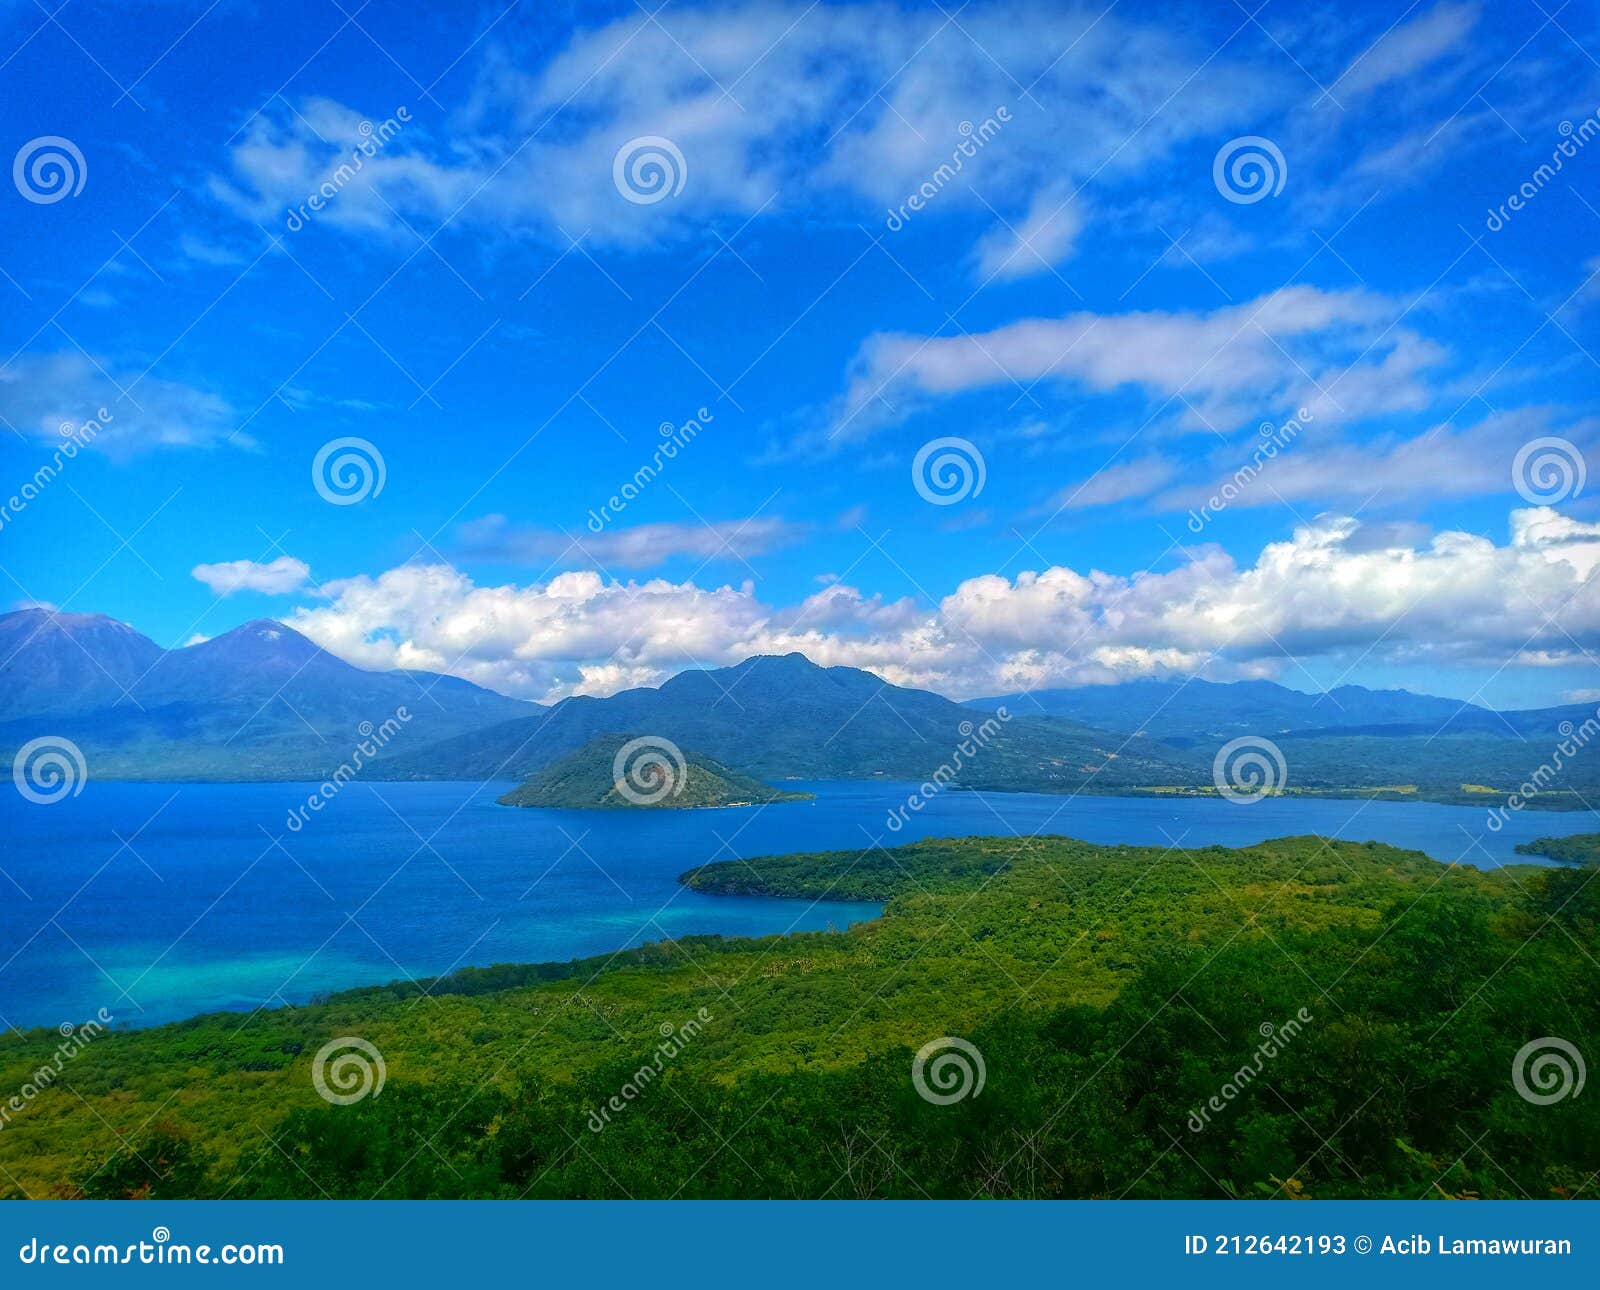 natural beauty in larantuka, the island of flores.